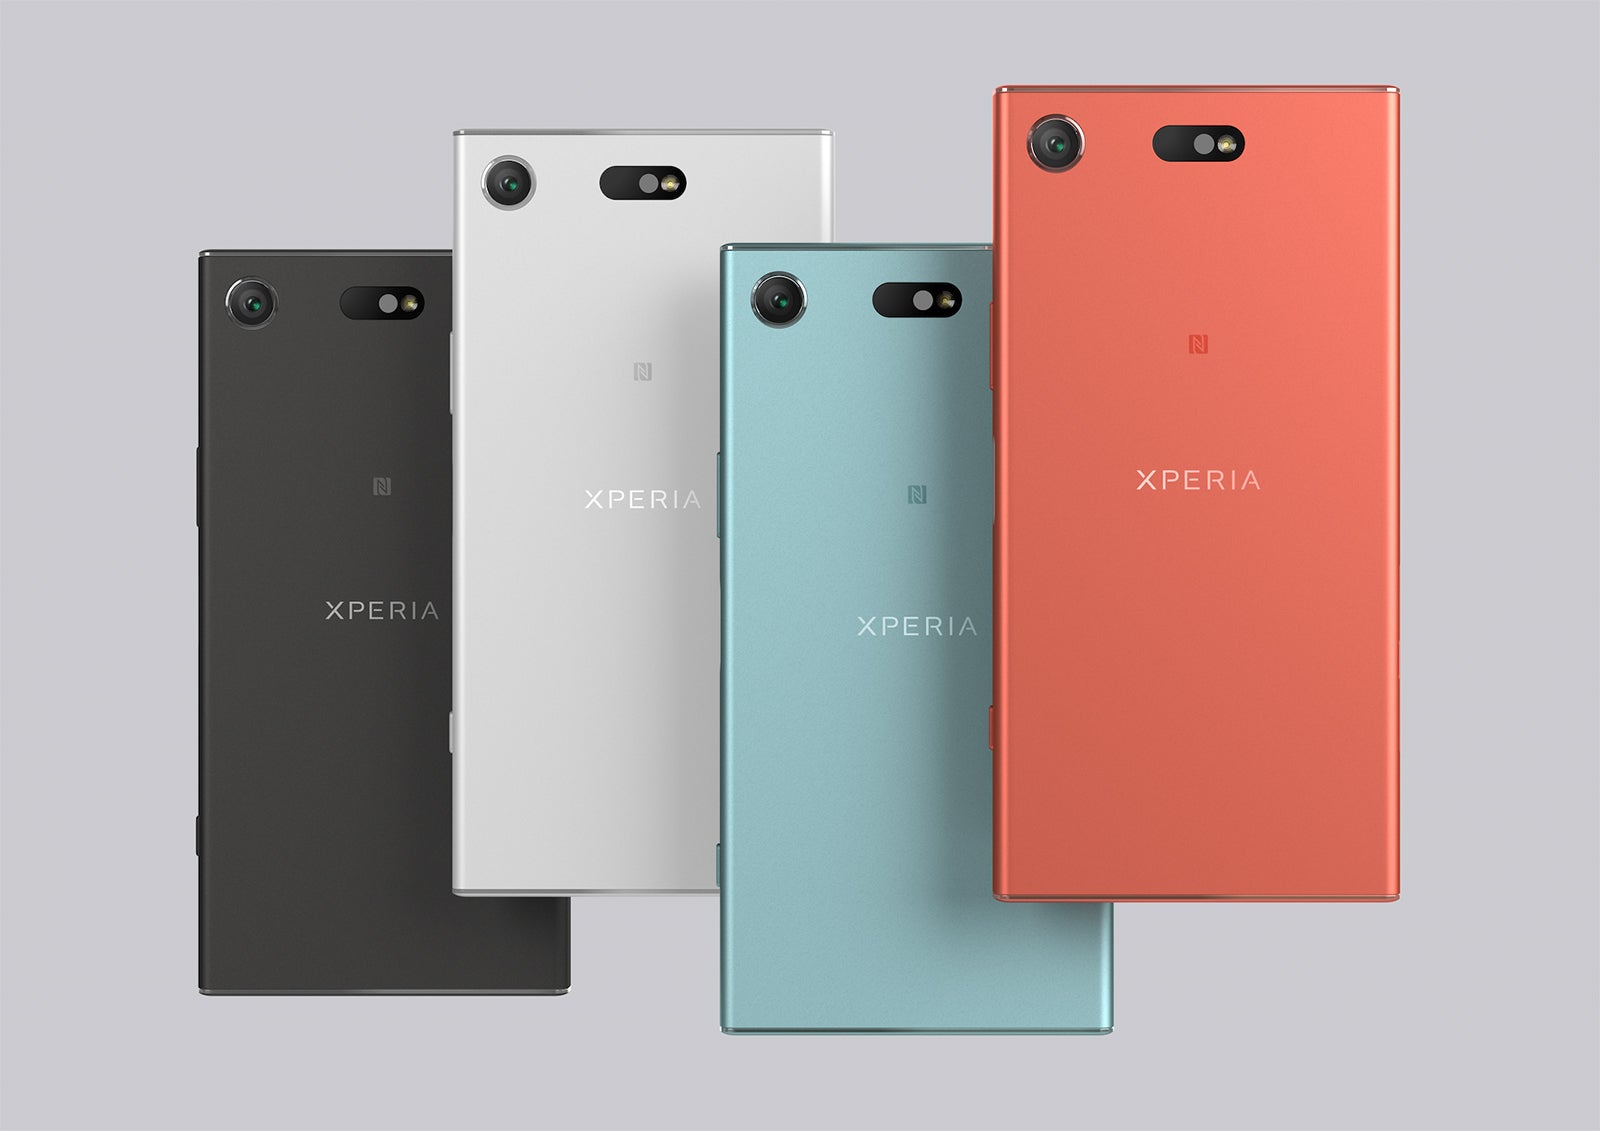 Sony announces the Xperia XZ1 Compact: Small in size, big in capabilities